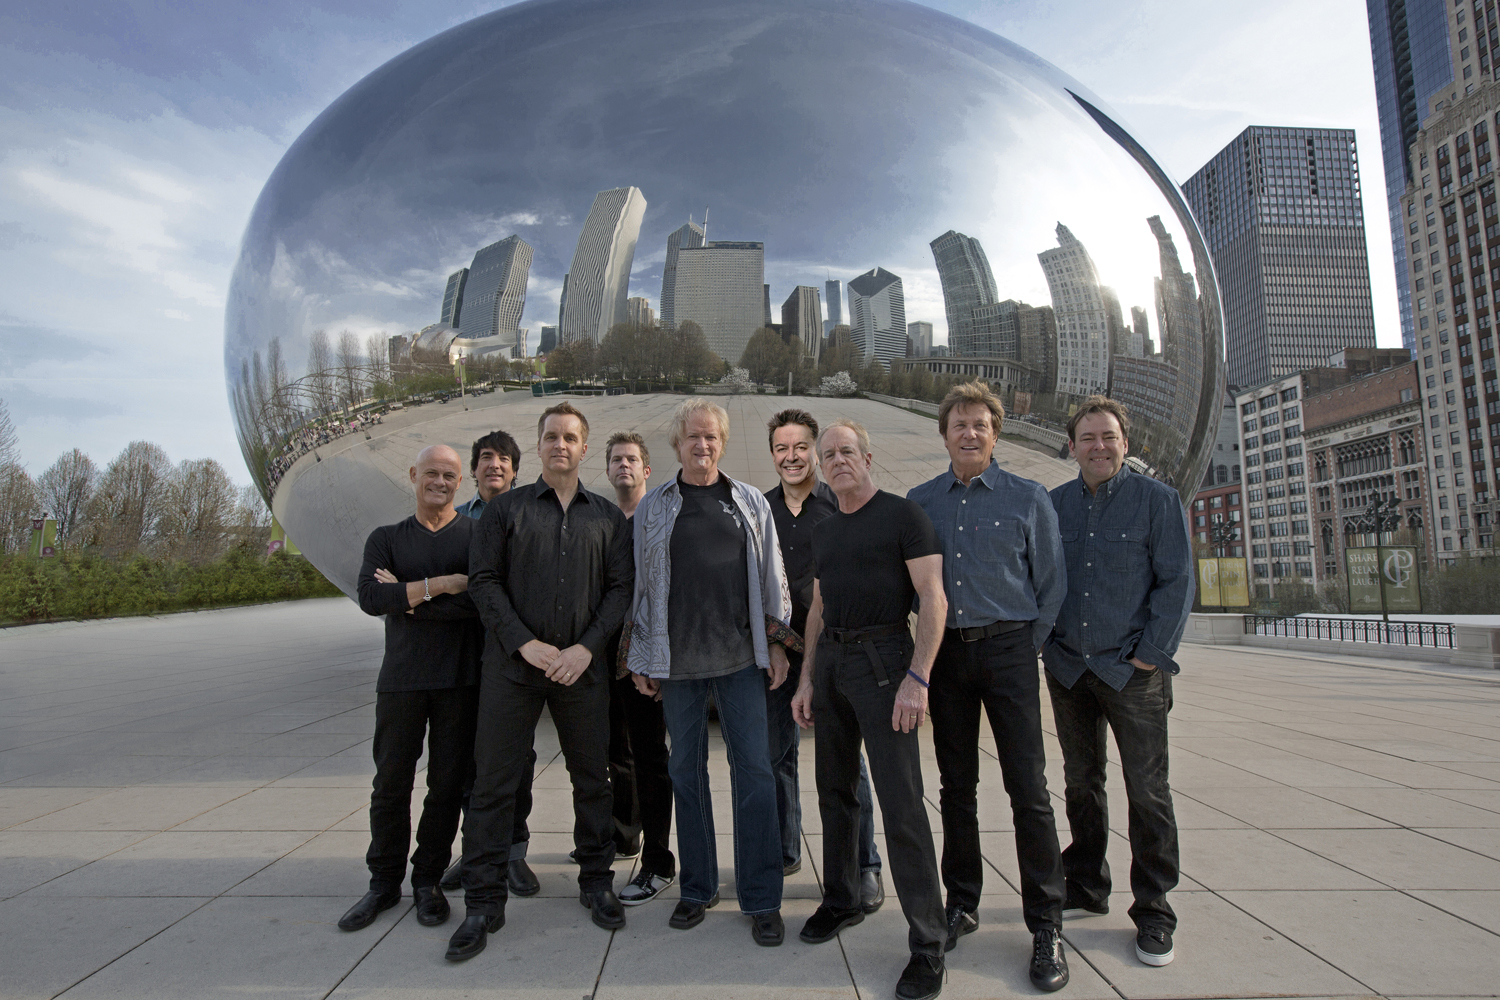 Classic Rock and Roll Band, Chicago, Returns to The Joint on May 13